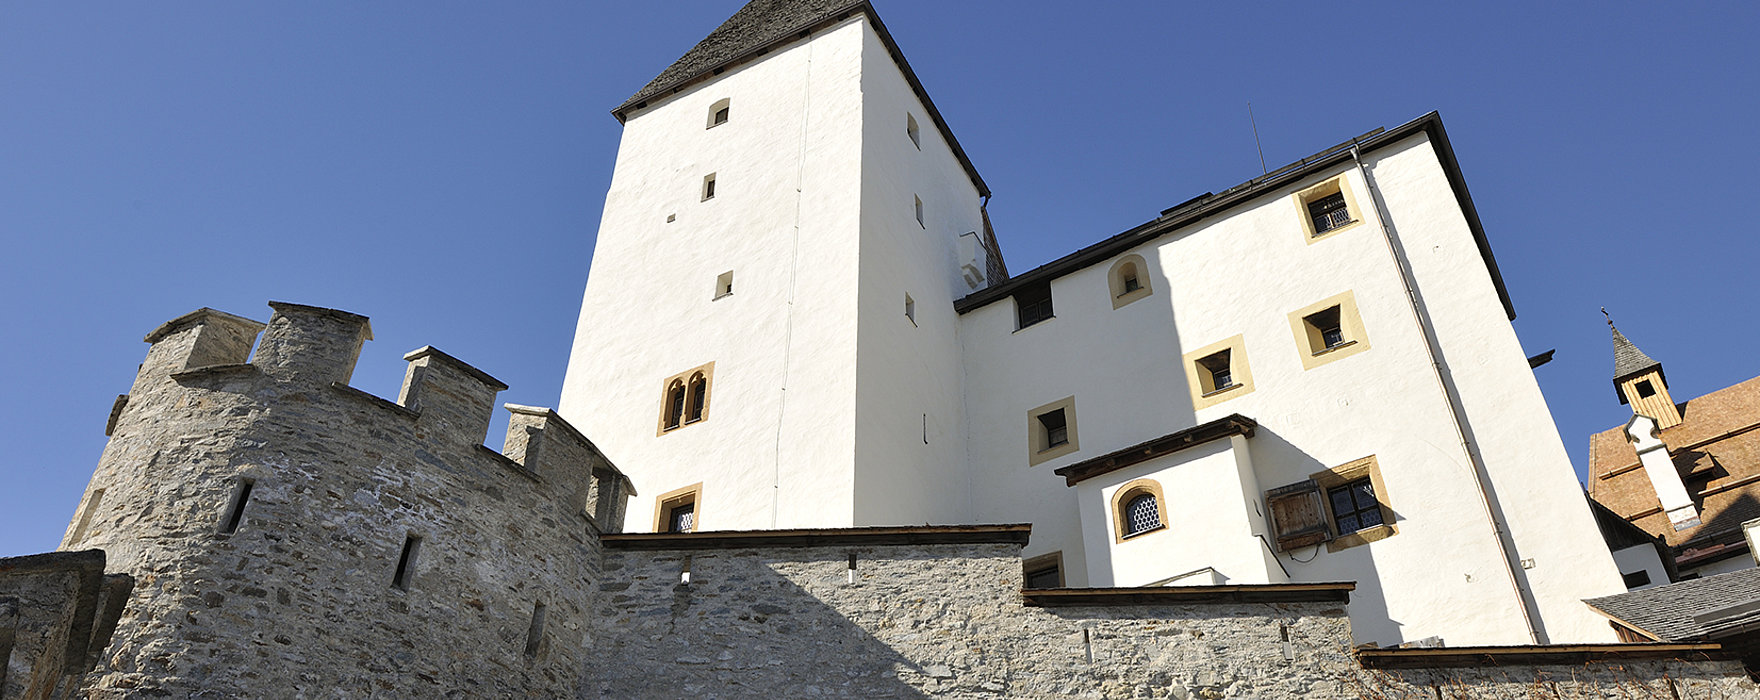 Mauterndorf Castle - view of the castle from the toll station